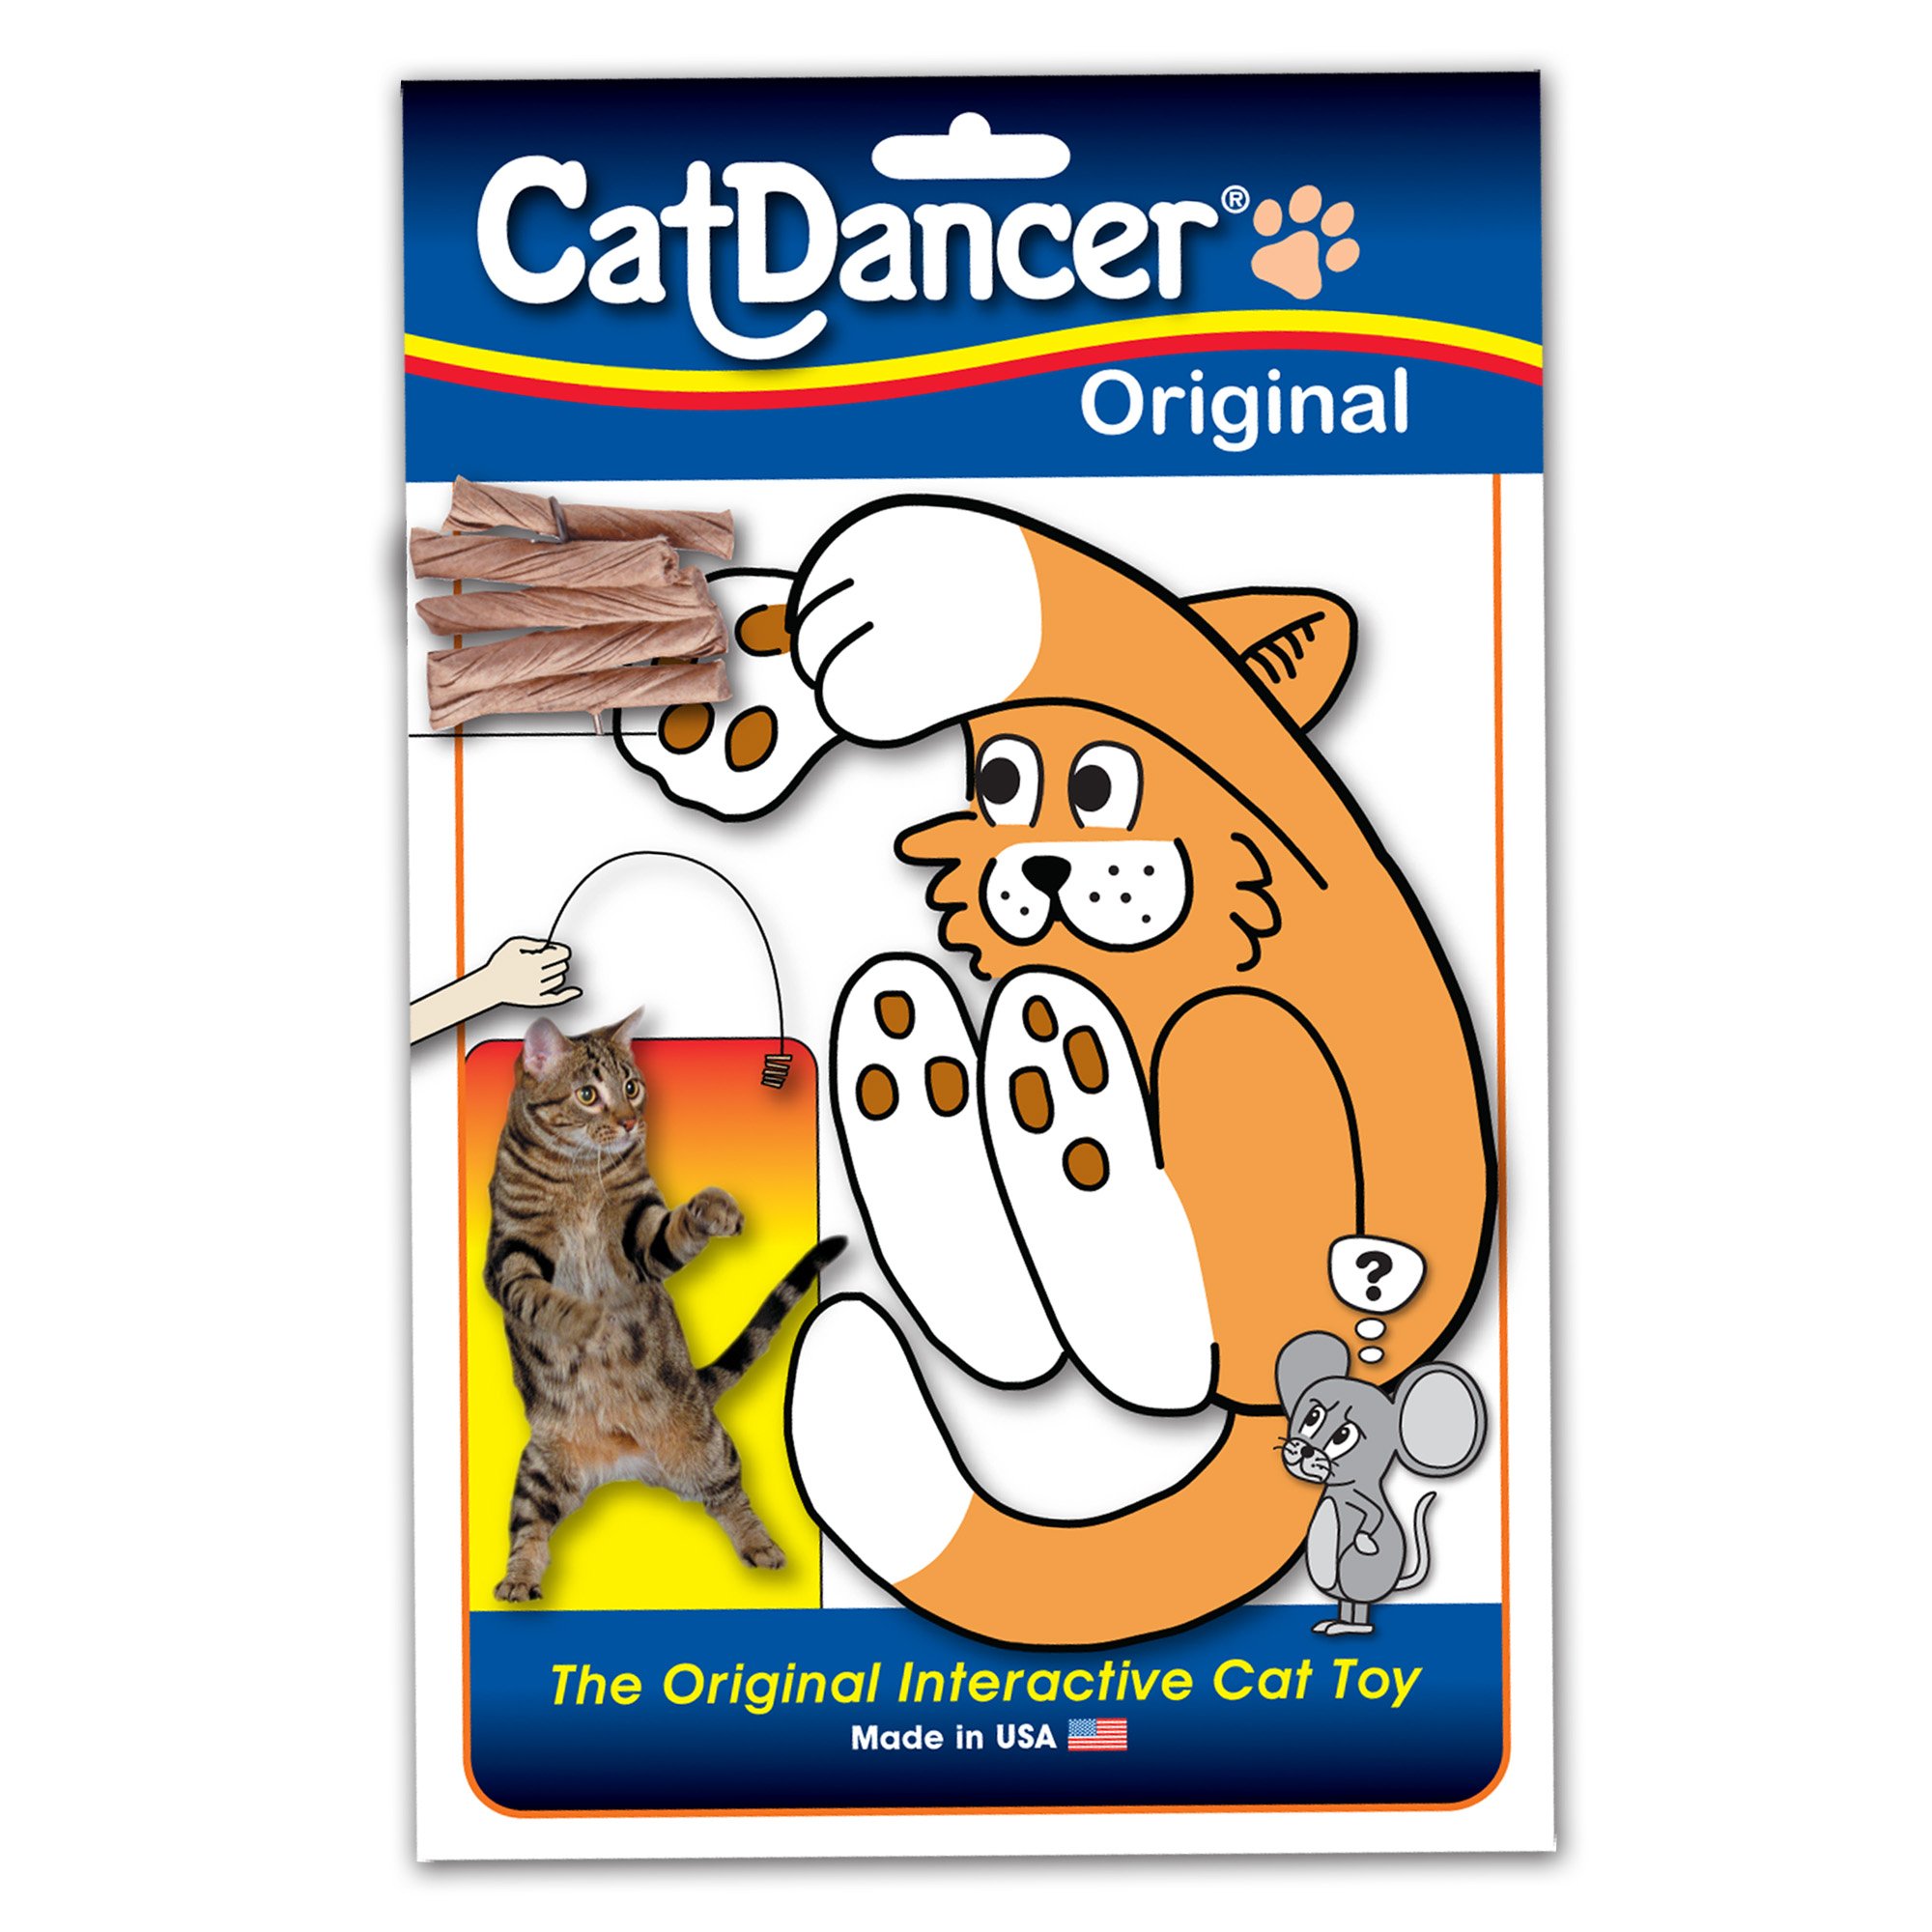 26 HQ Images Cat Dancer Toy Video - Cat Dancer Toy-Interactive Cat Toys & EBOOK HOW TO TRAIN ...